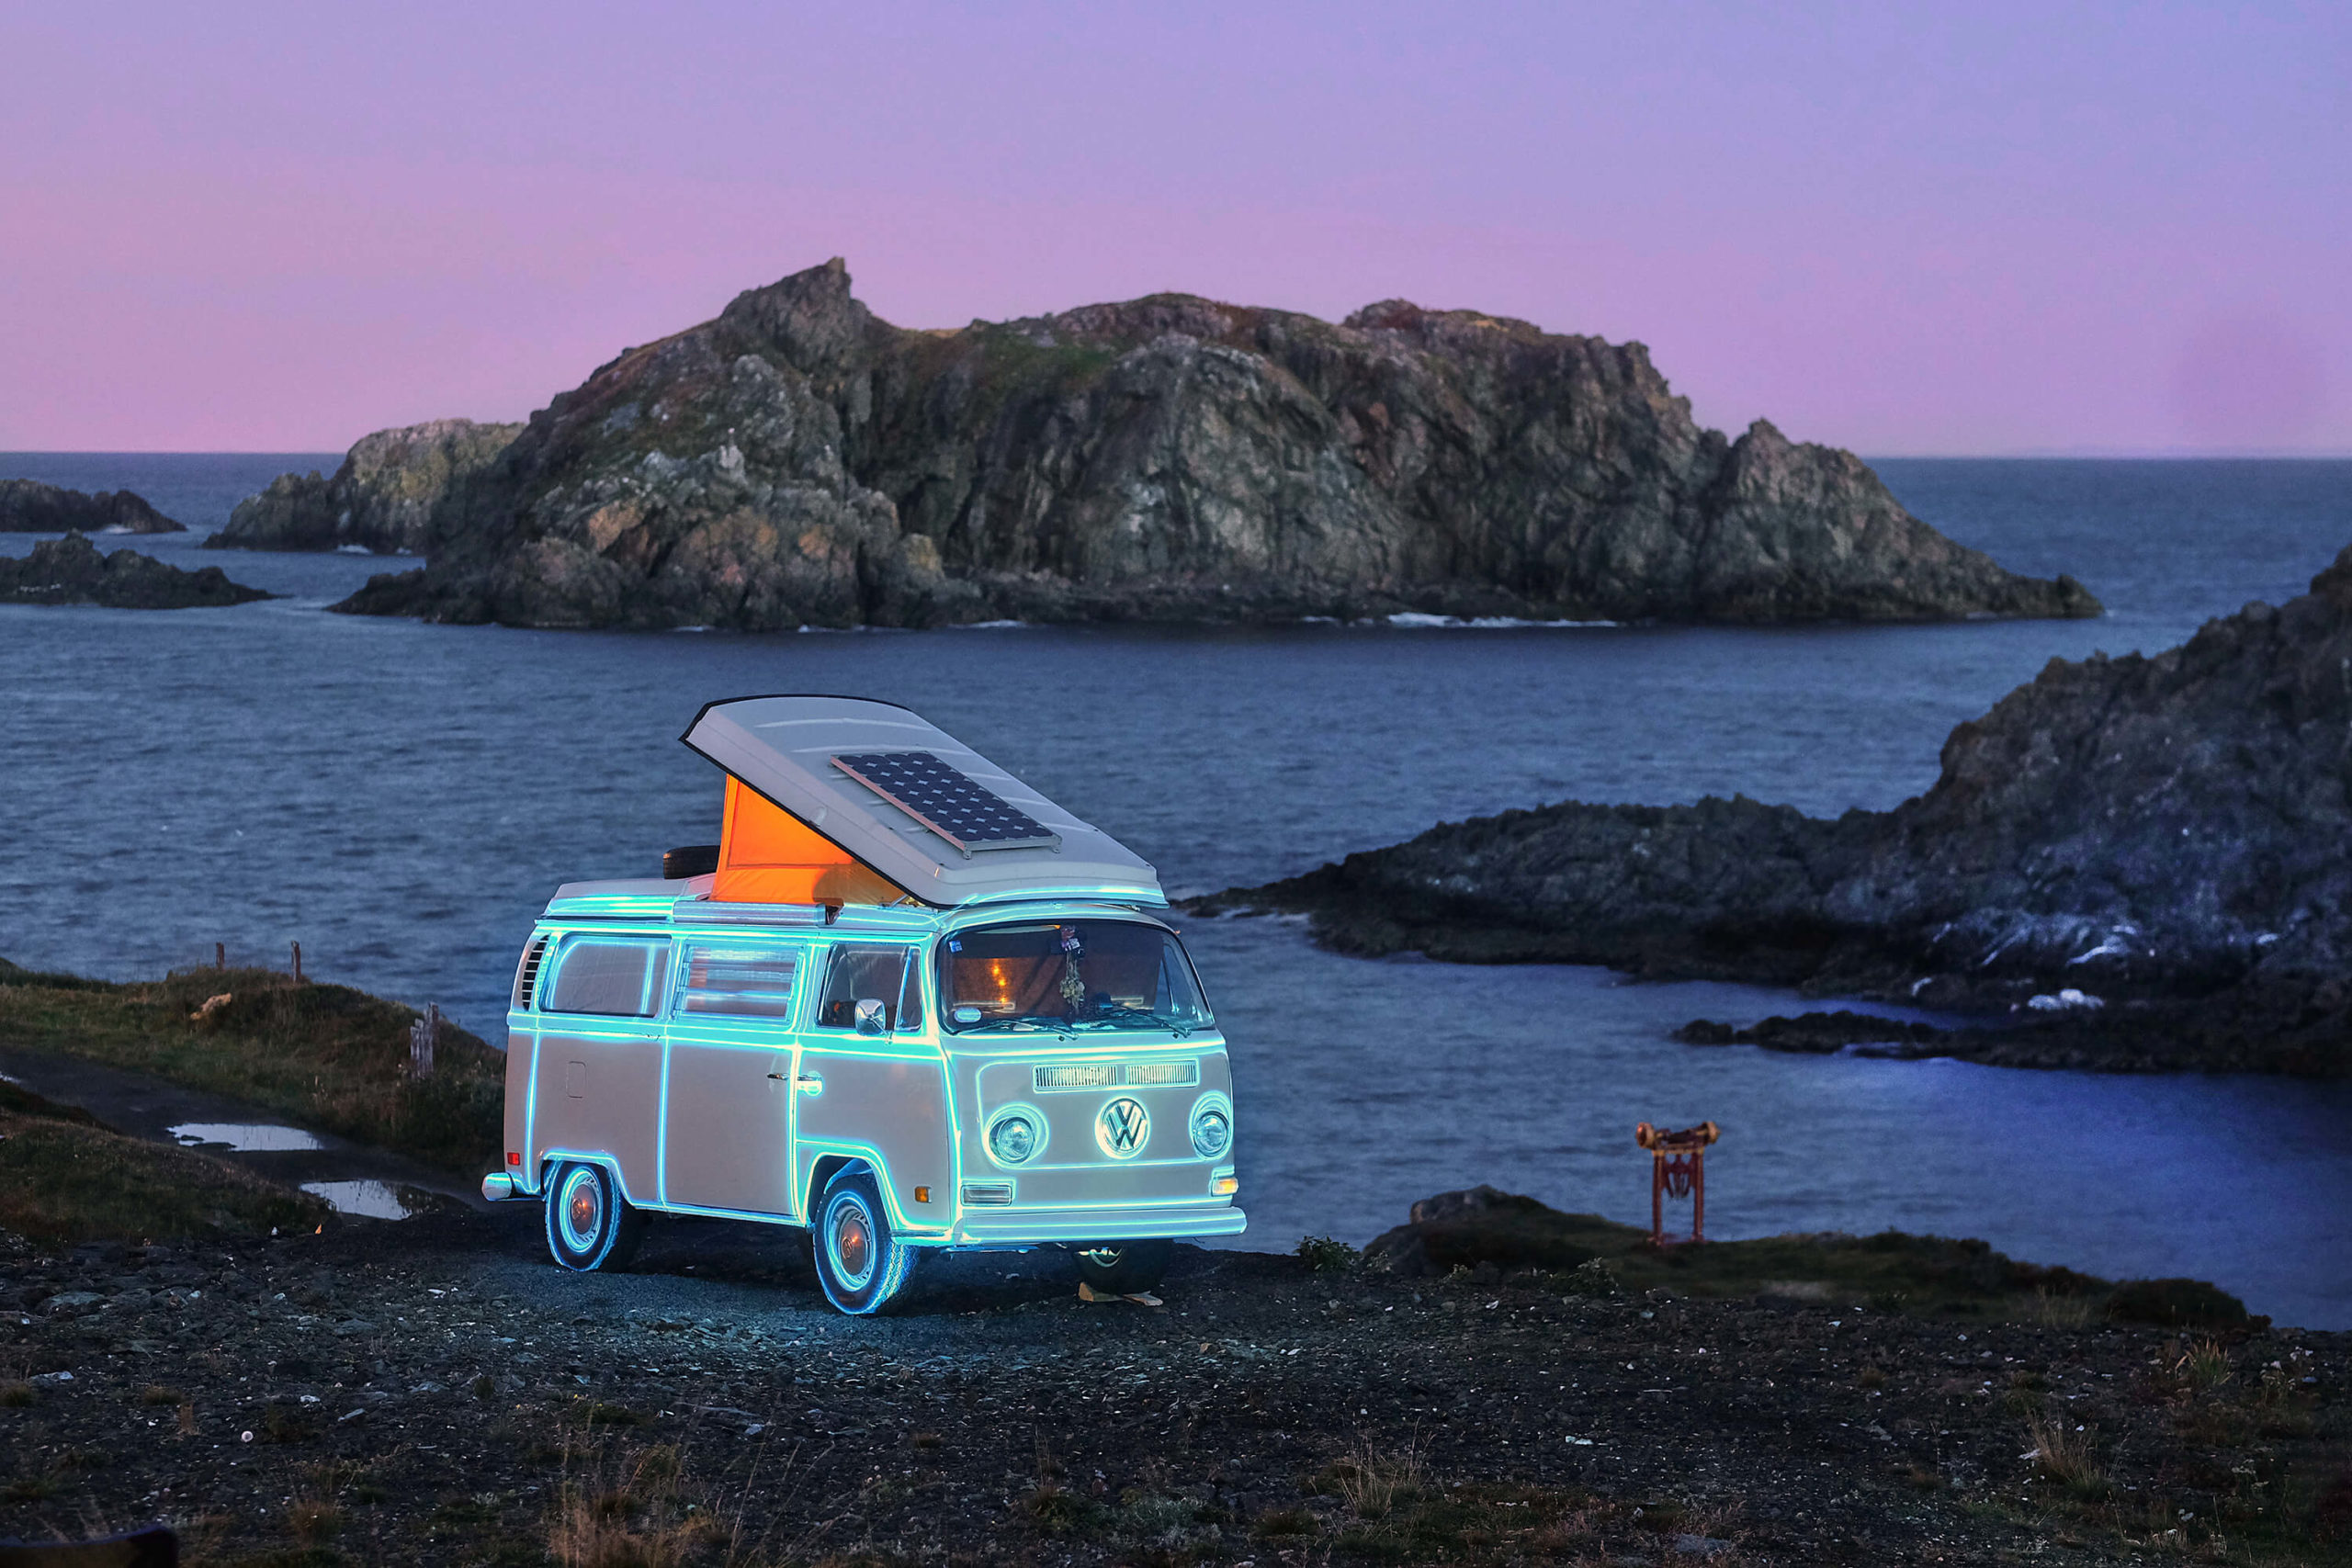 Sean Was Here Projection Mapping Installation on VW Bus Newfoundland